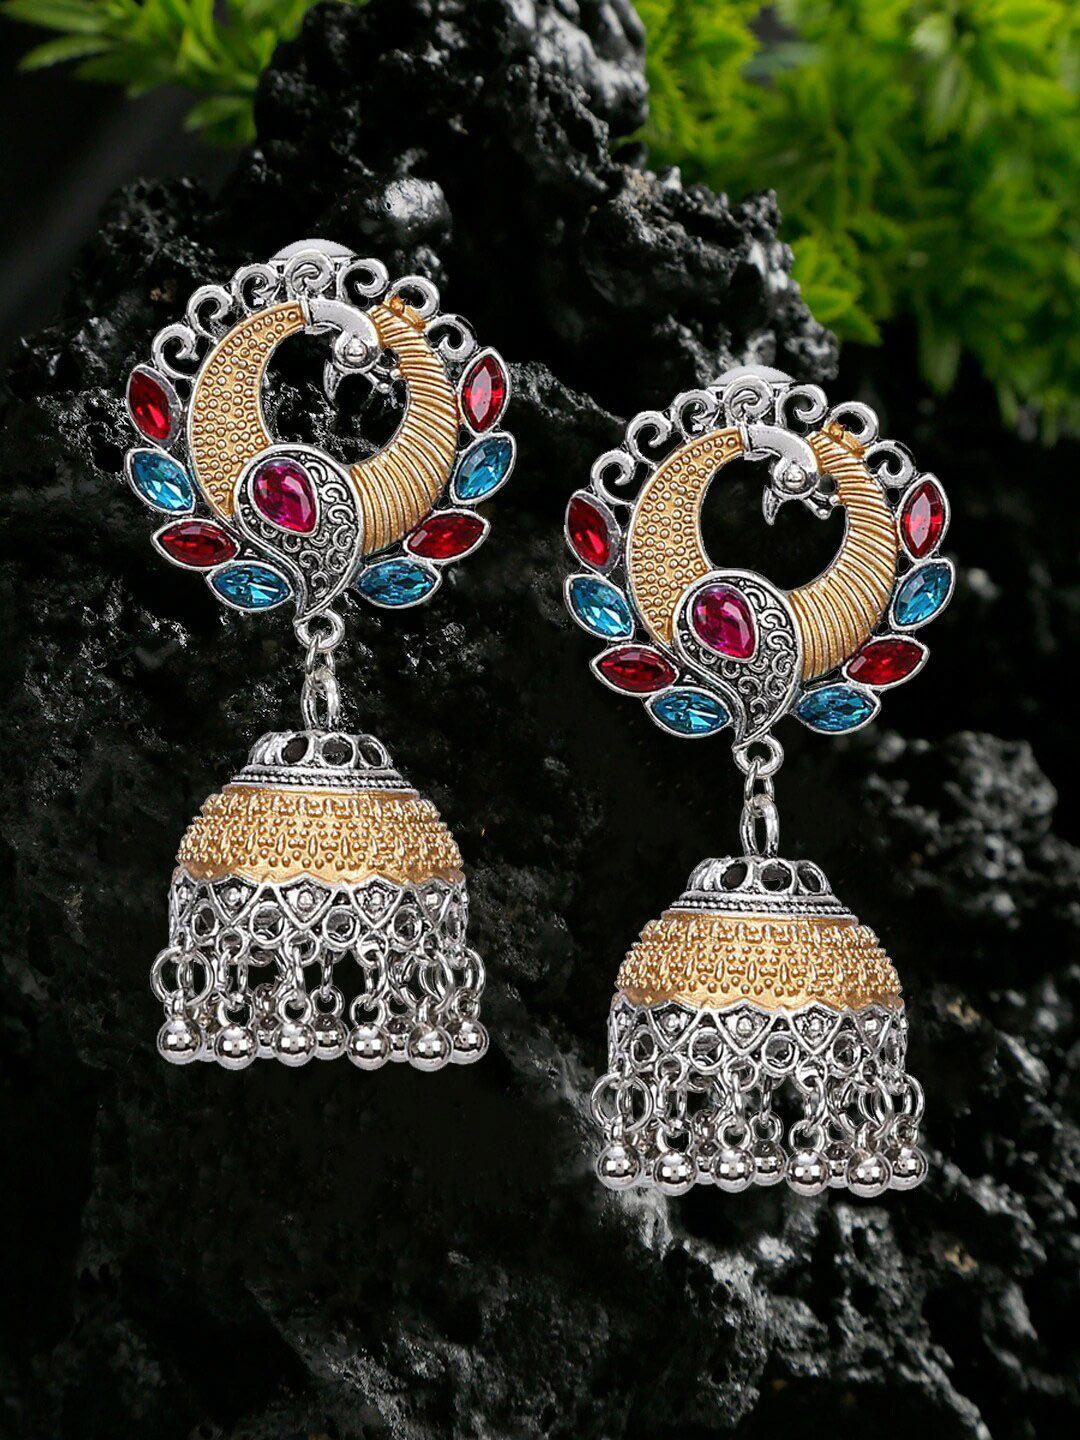 youbella silver-plated dome shaped jhumkas earrings